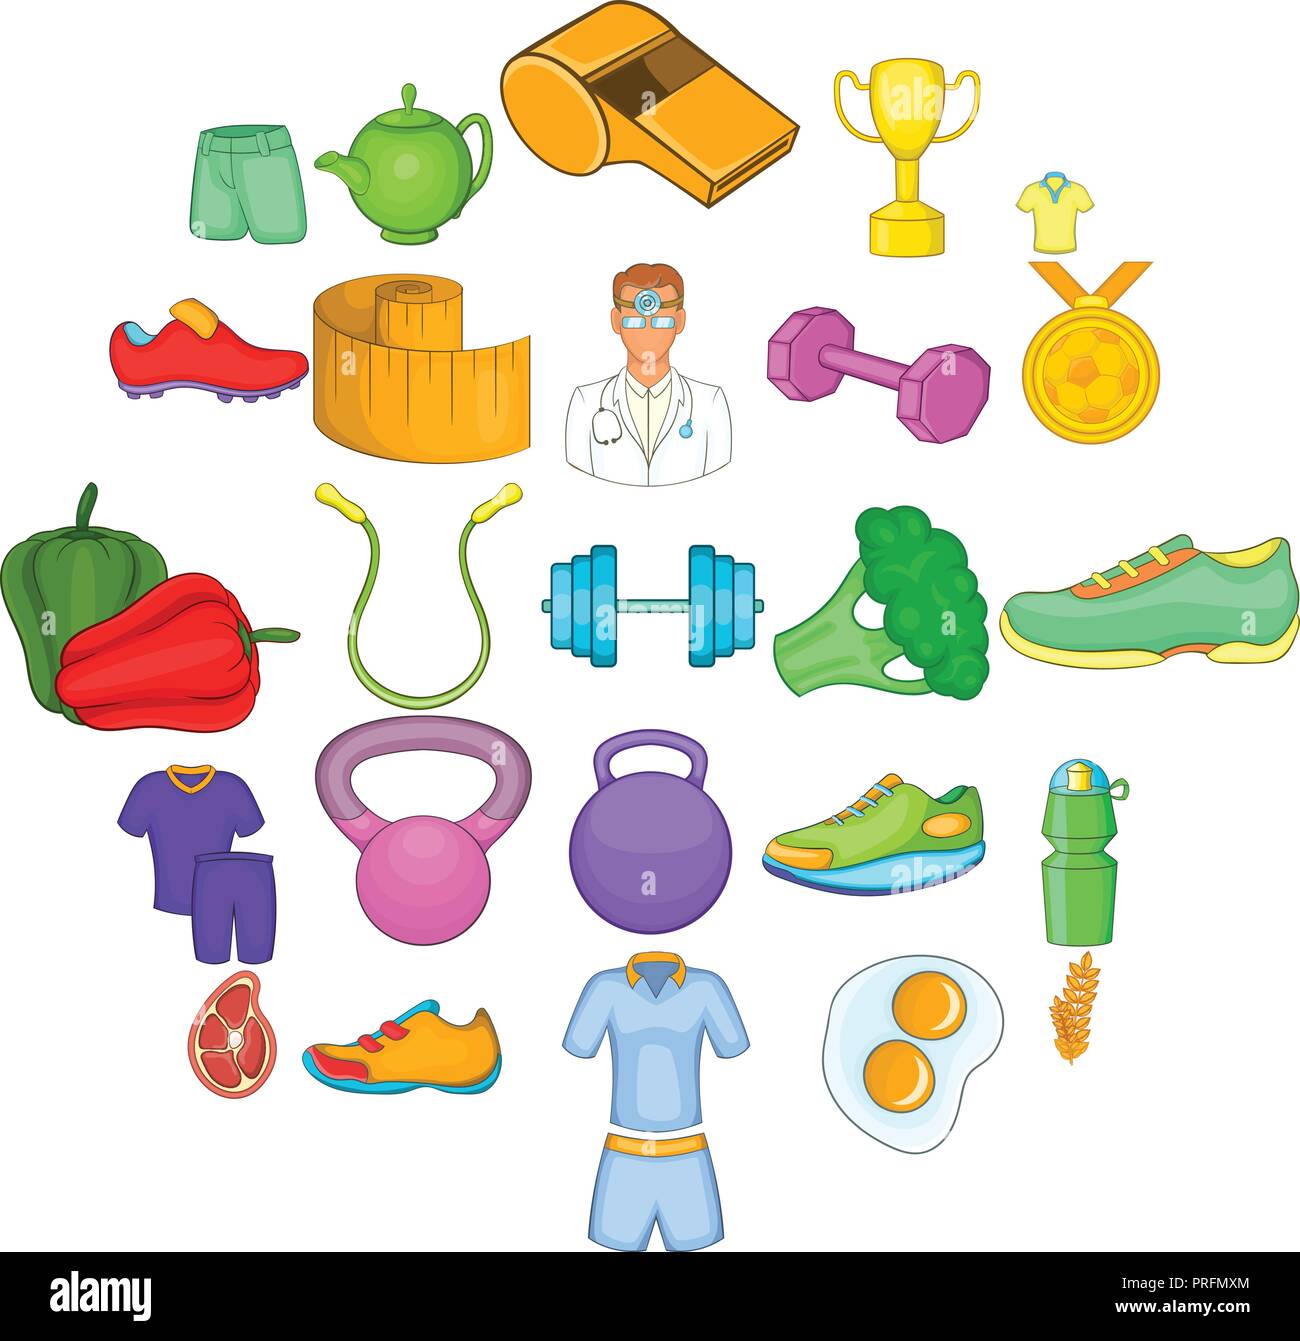 Healthy Lifestyle Icons Set Cartoon Style Stock Vector Image And Art Alamy